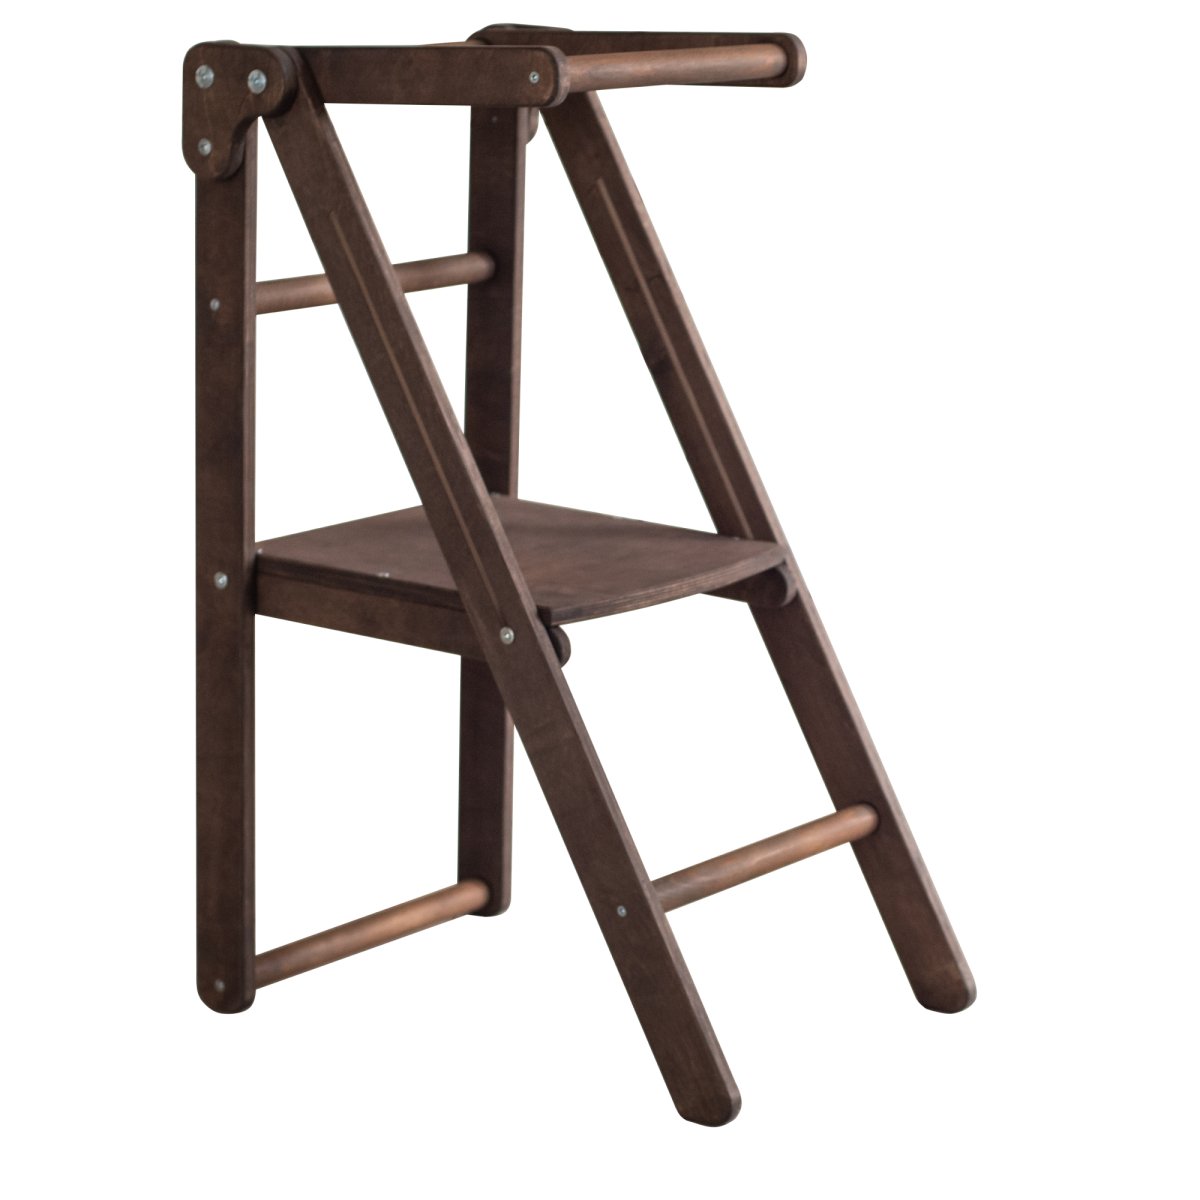 Foldable Toddler Tower - Chocolate